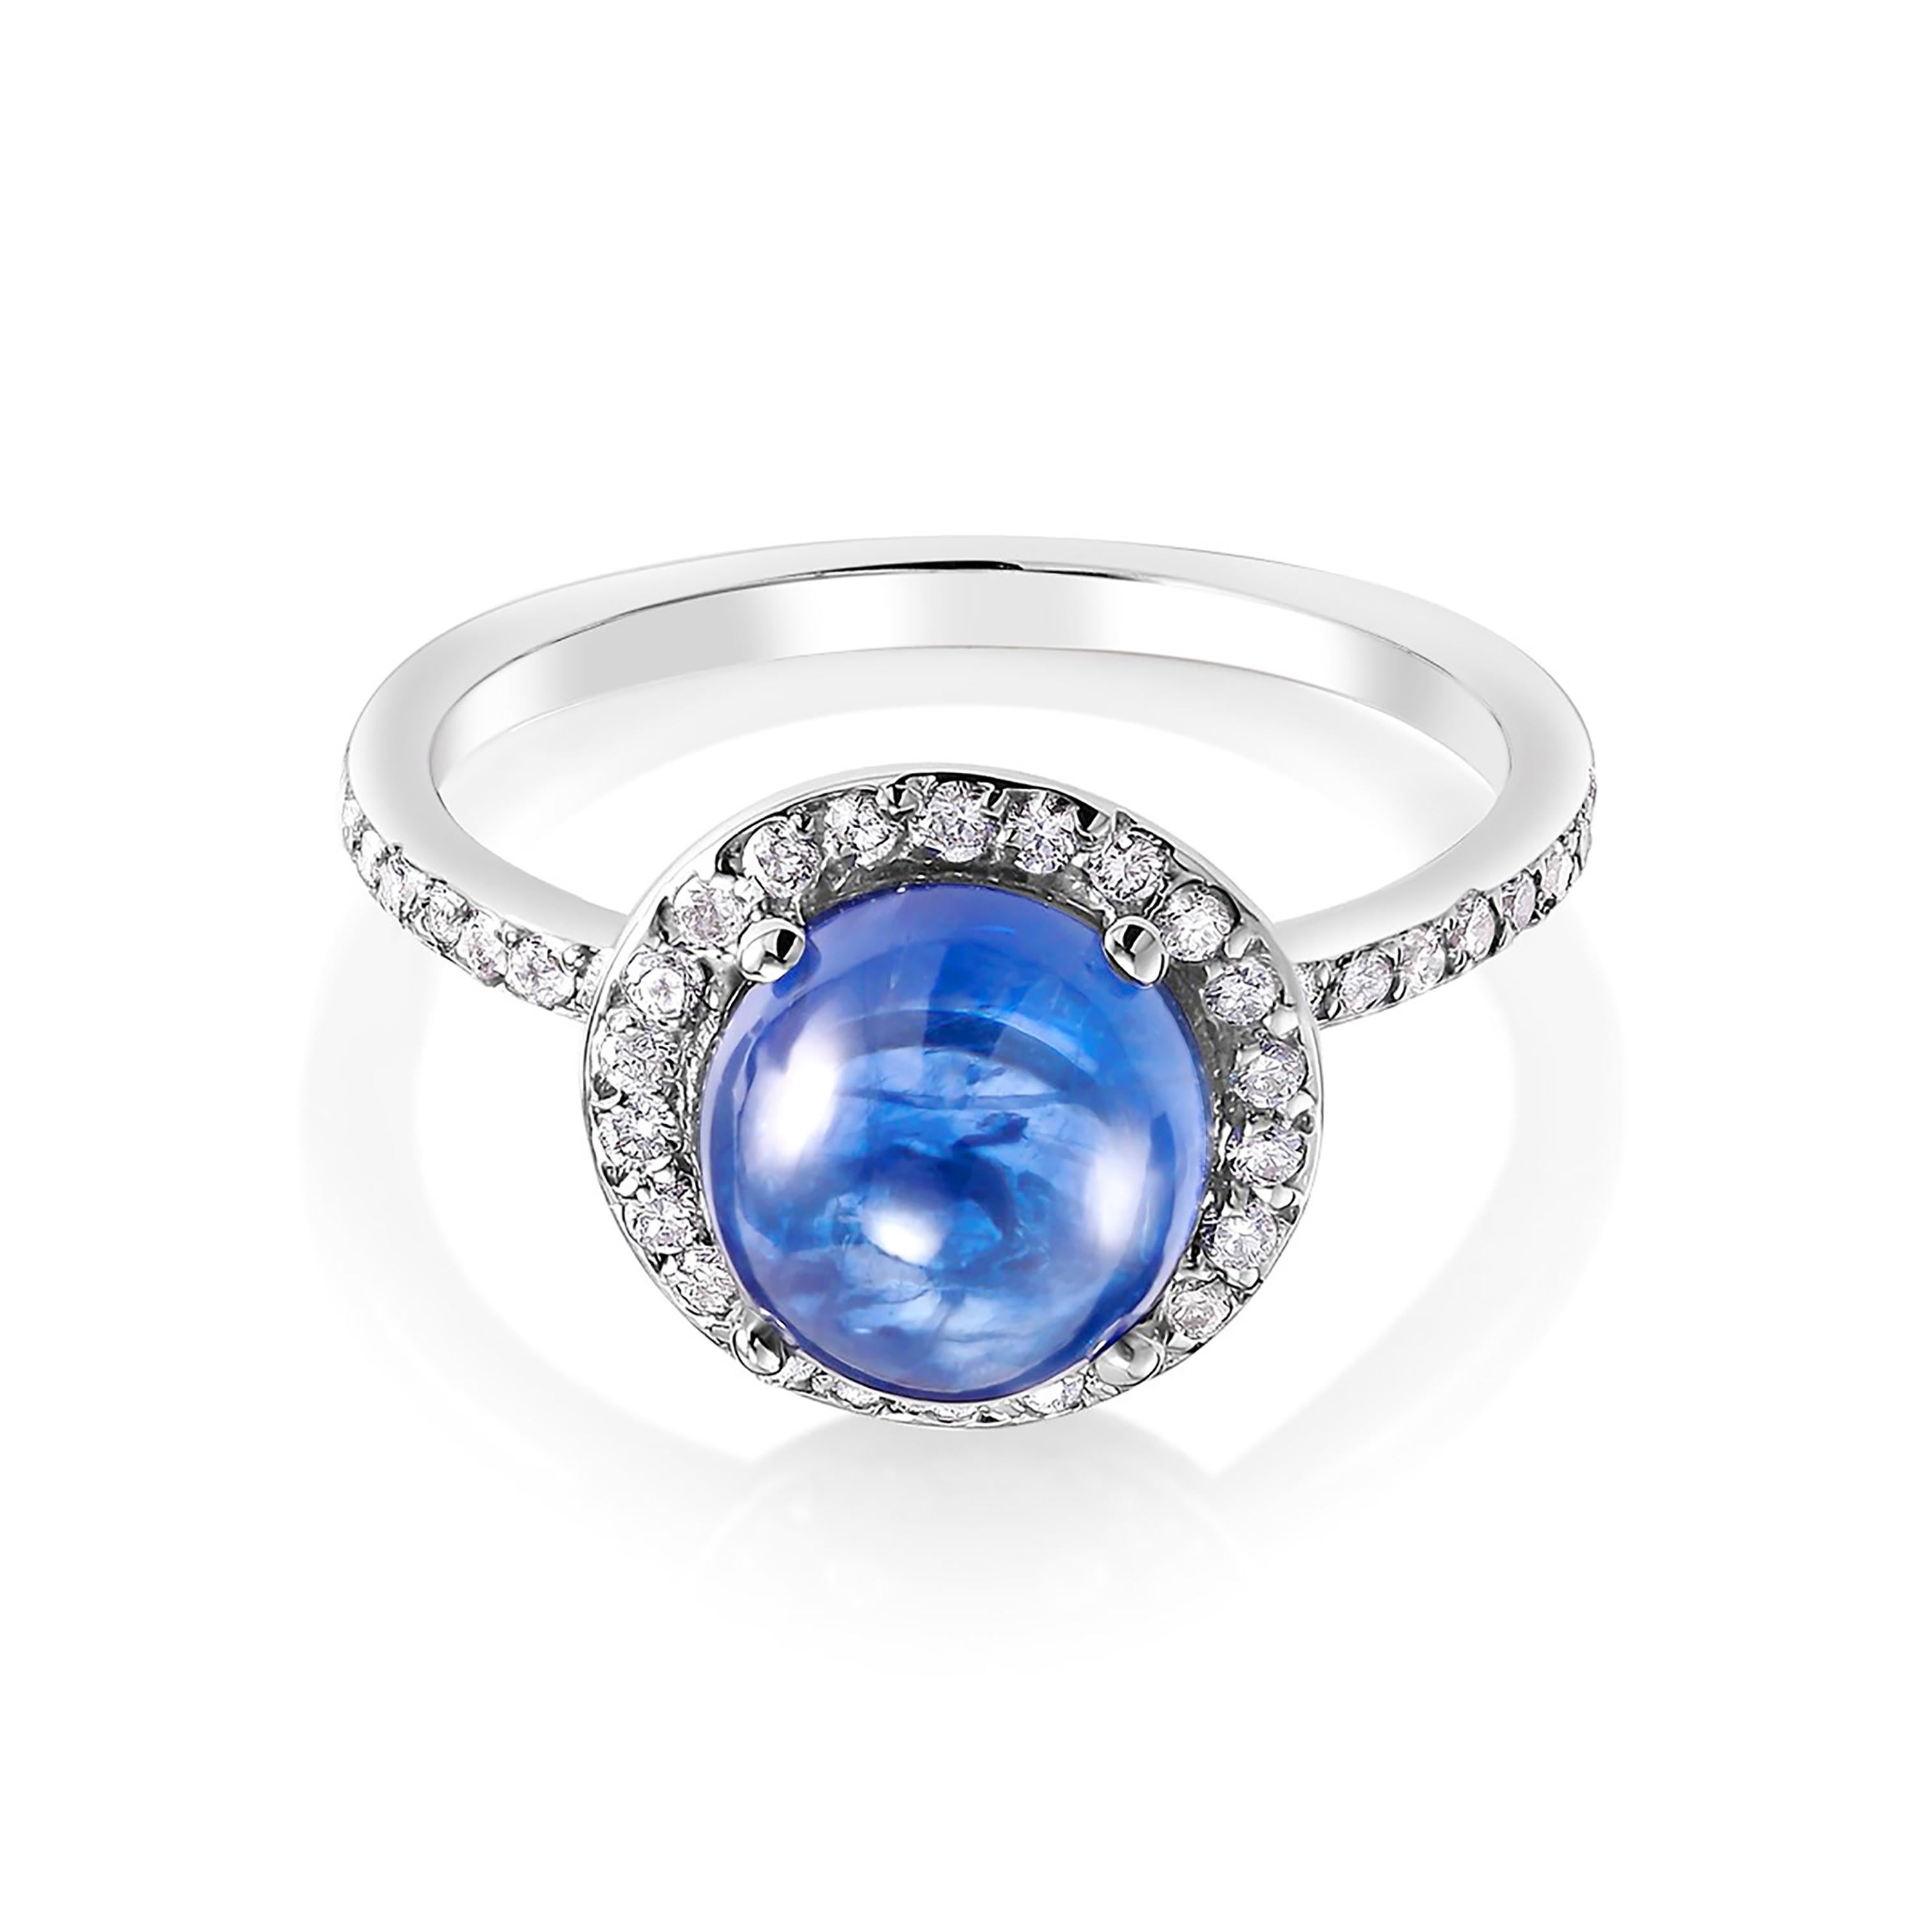 Eighteen karats white gold cluster ring
Ceylon cabochon sapphire weighing 3.60 carat    
Sapphire hue tone color cornflower blue  
Round diamonds weighing 0.60 carat                                                                  
Ring size 6 In